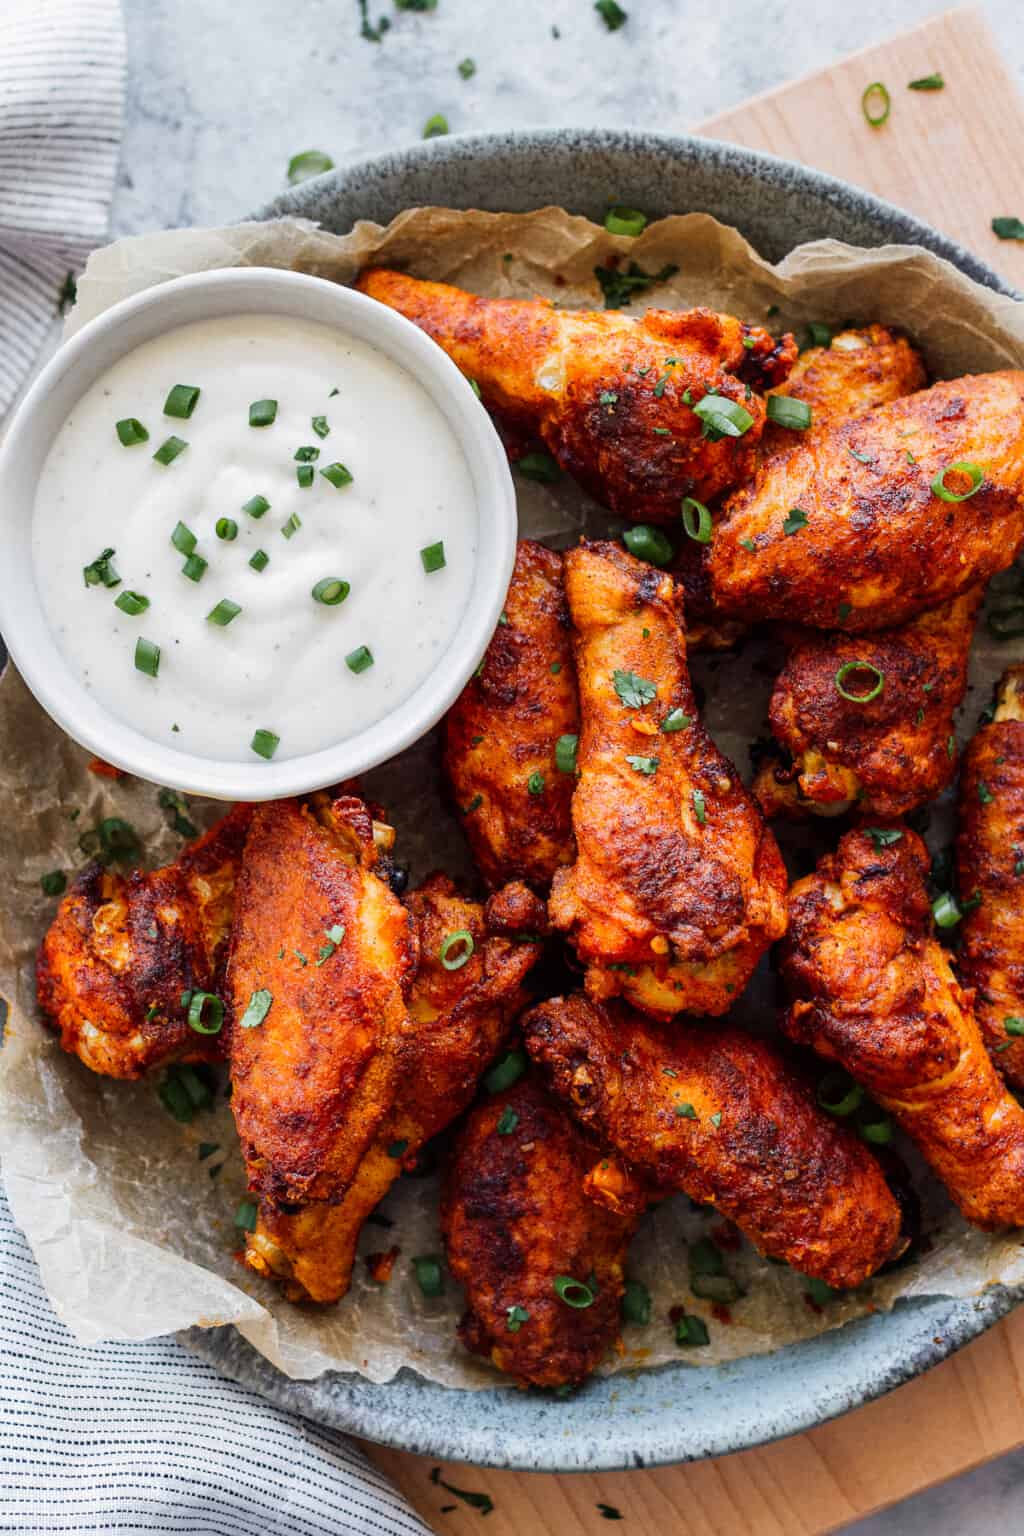 Baked Chicken Wings Recipe with Seasoning